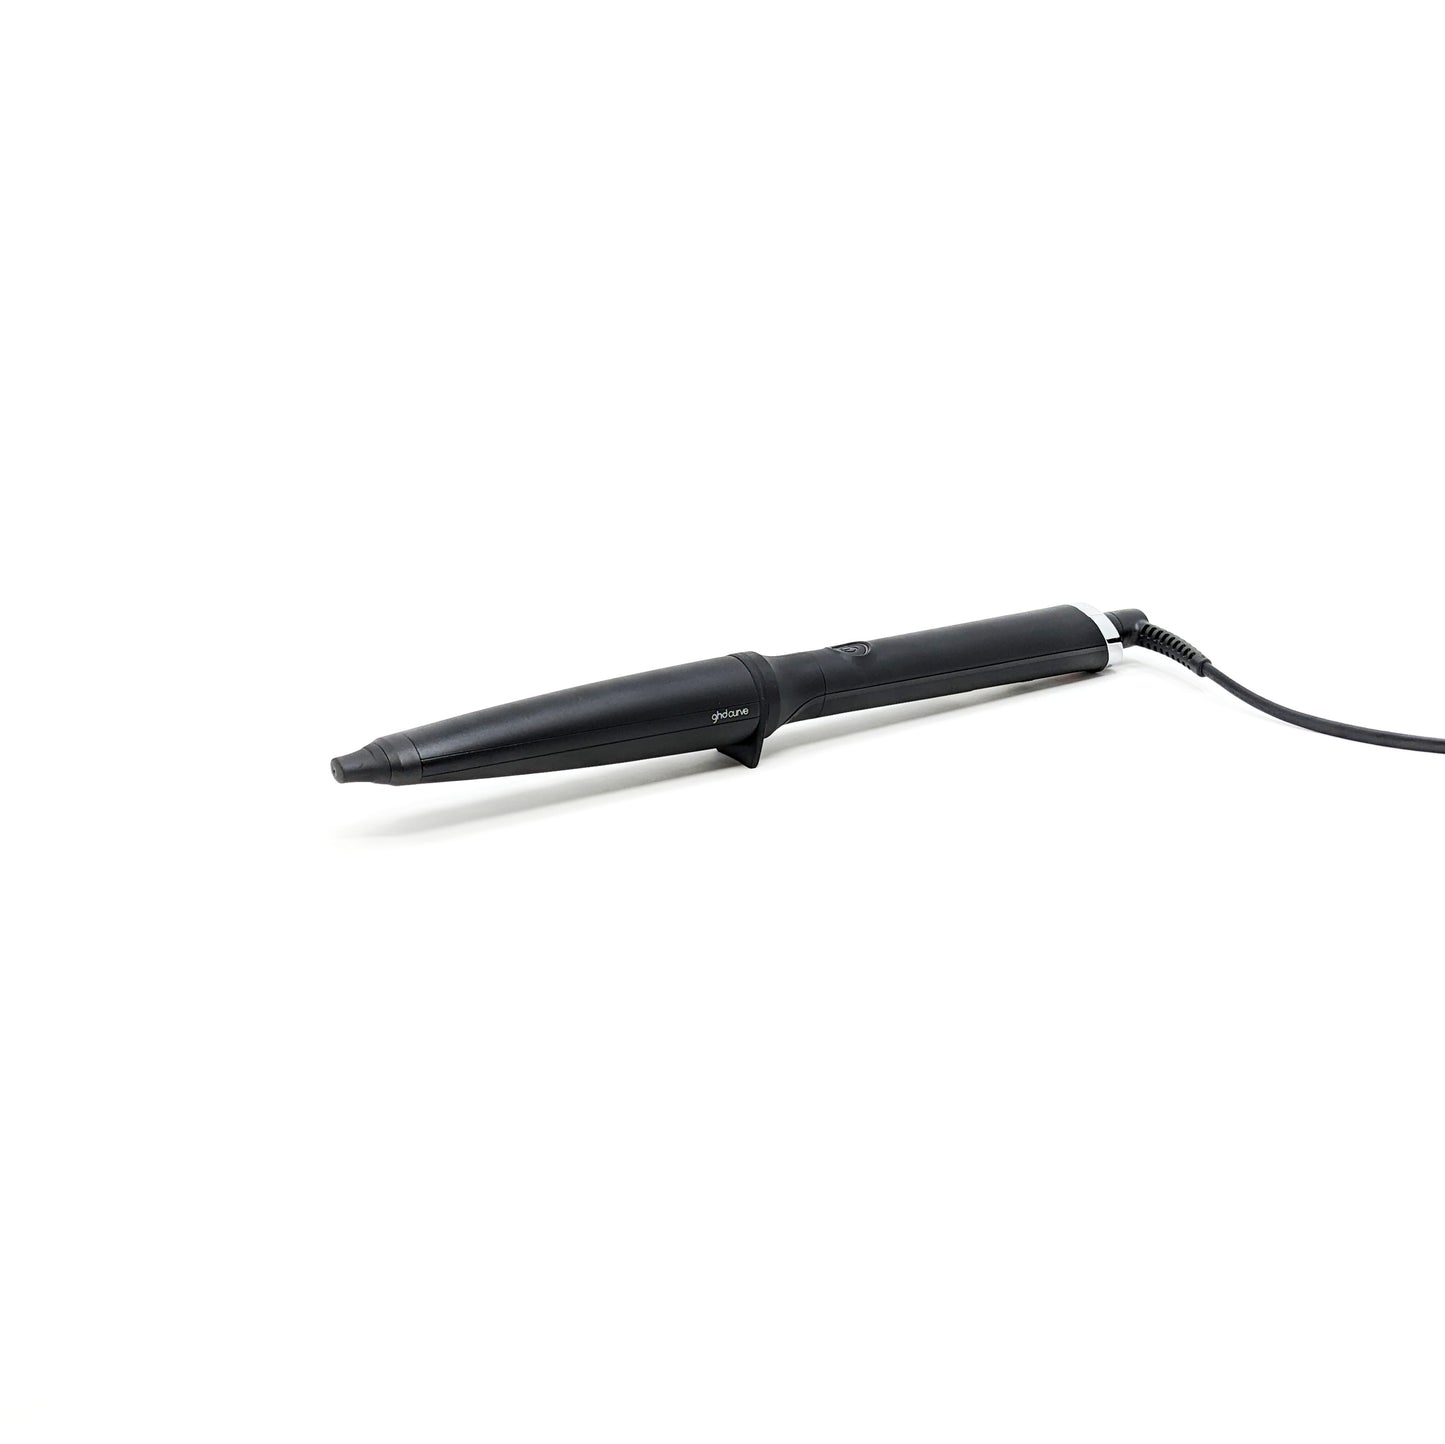 GHD Curve Wand Creative Curl 28-23mm Curler Only - Ex Display Missing Box